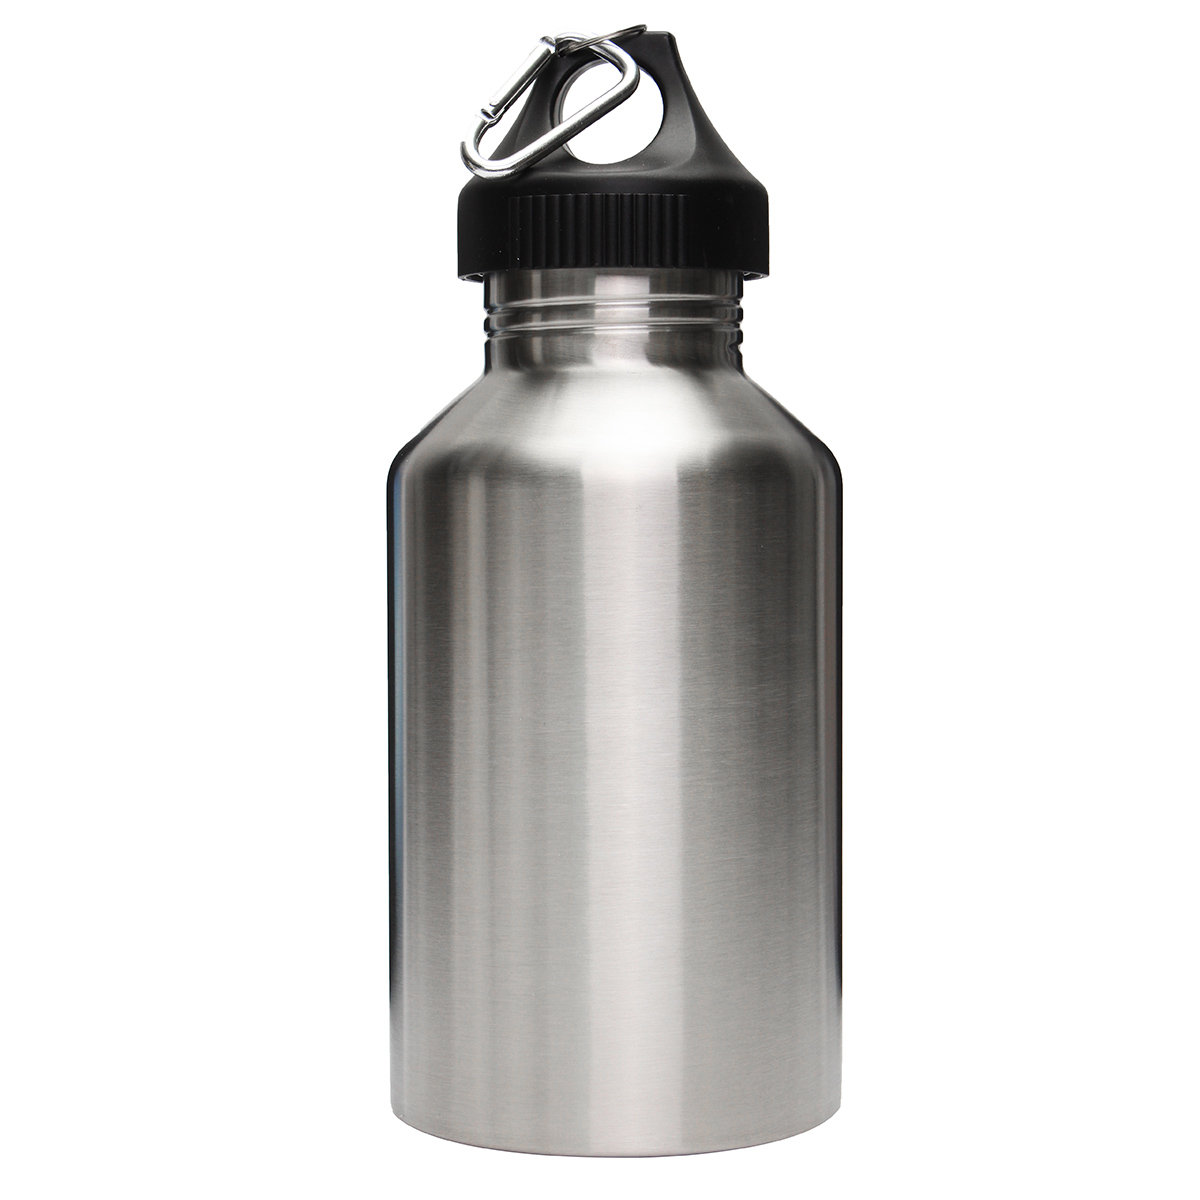 

2L Large Volume Stainless Steel Water Drink Bottle Outdoor Activity Water Bottle